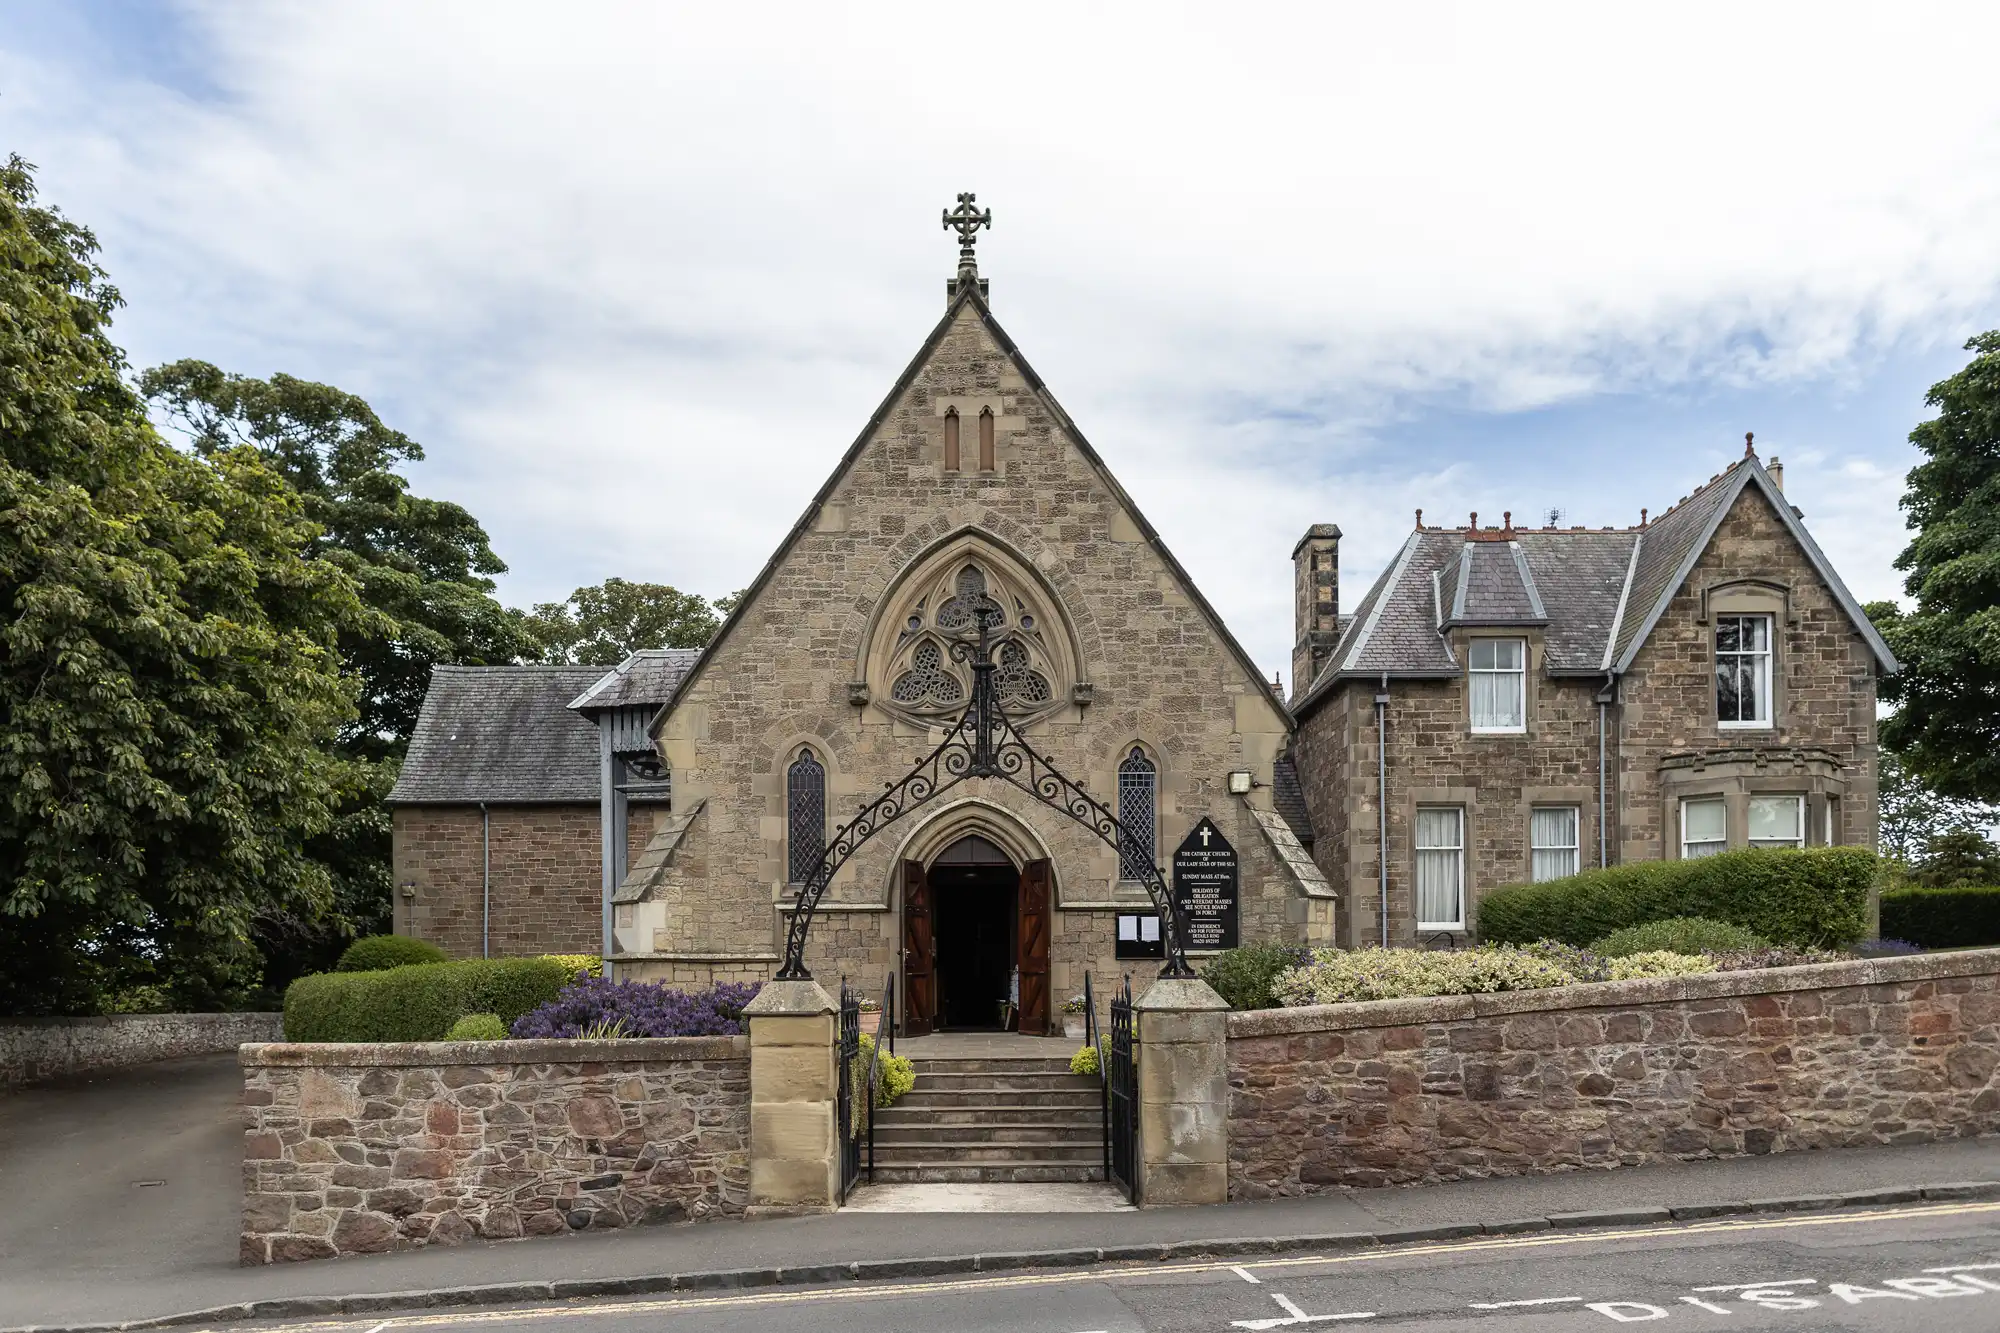 A quaint stone church with an arched entrance and detailed façade, flanked by a traditional house, set against a clear sky and surrounded by lush greenery.